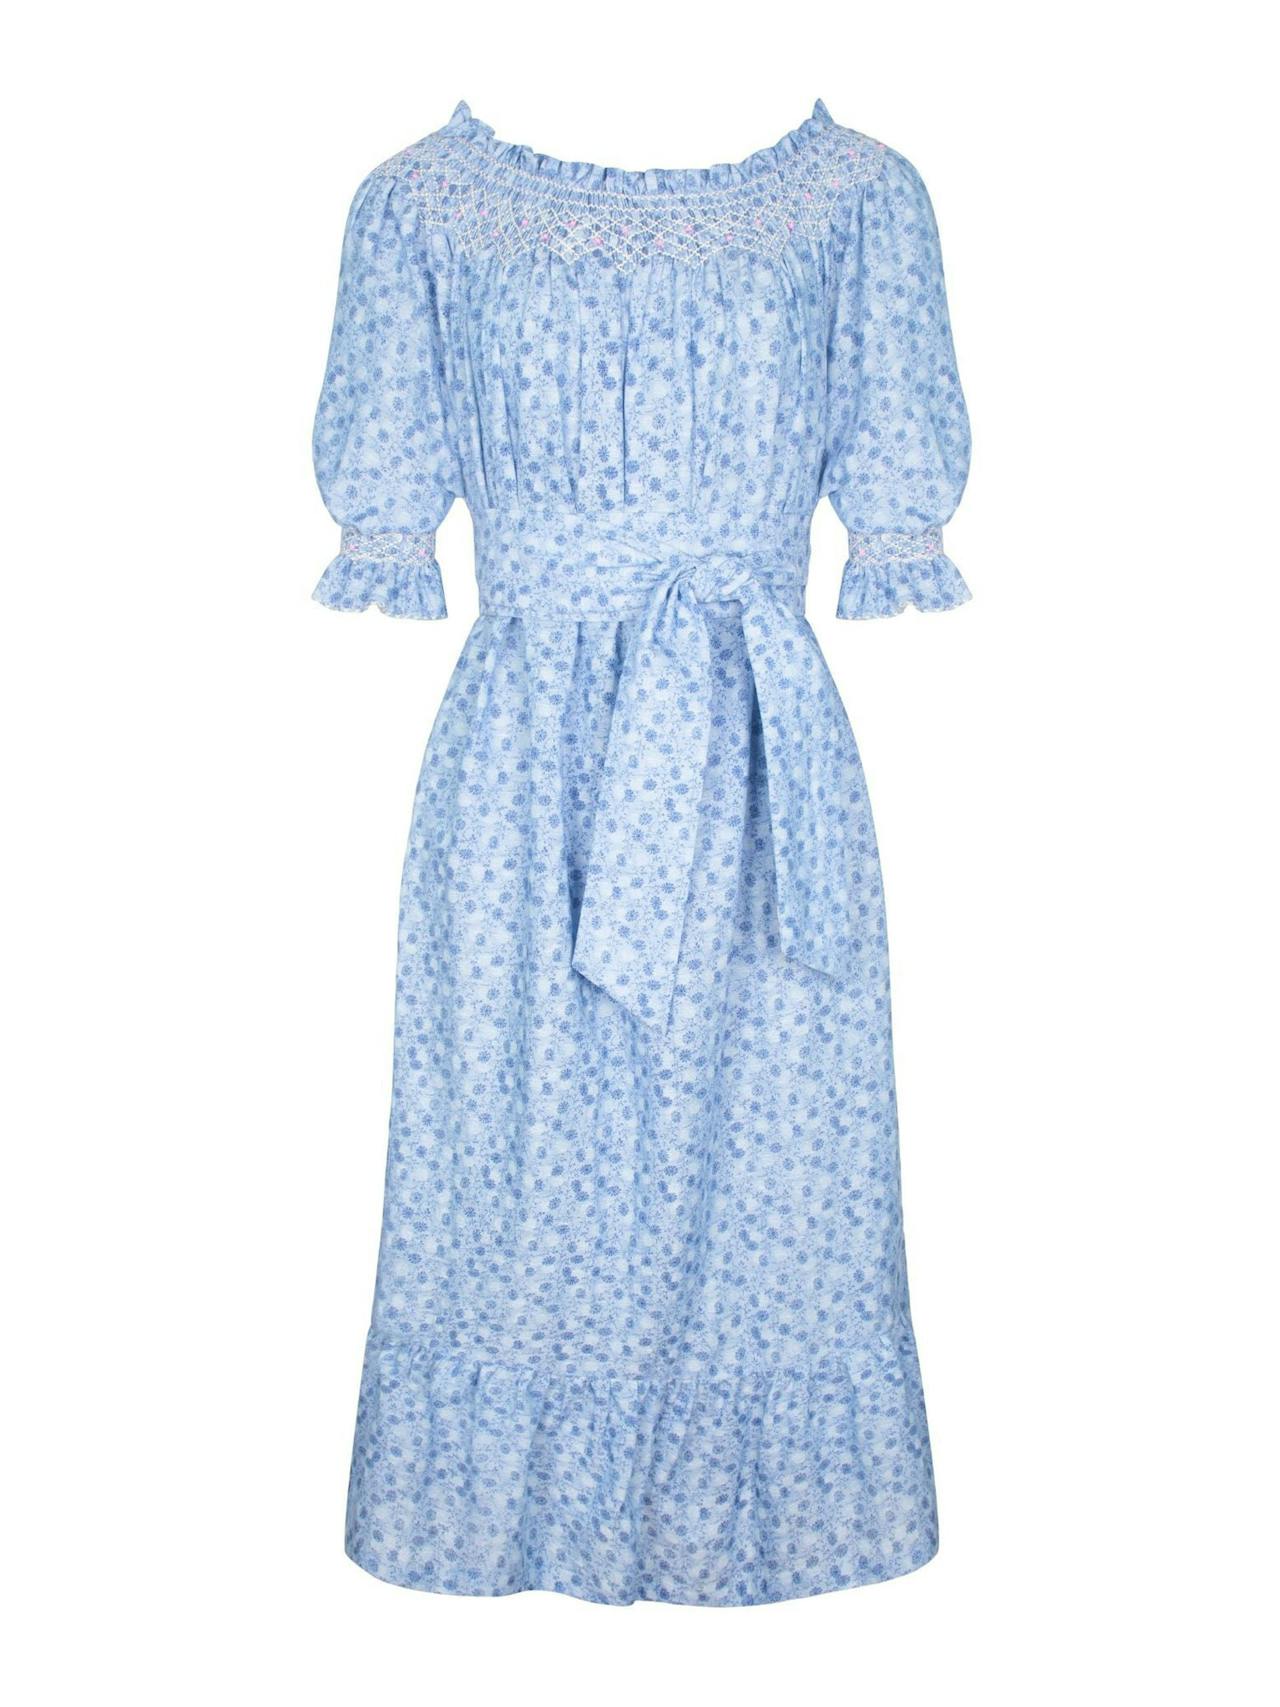 Grace darling dress flower power chambray with opaline hand smocking